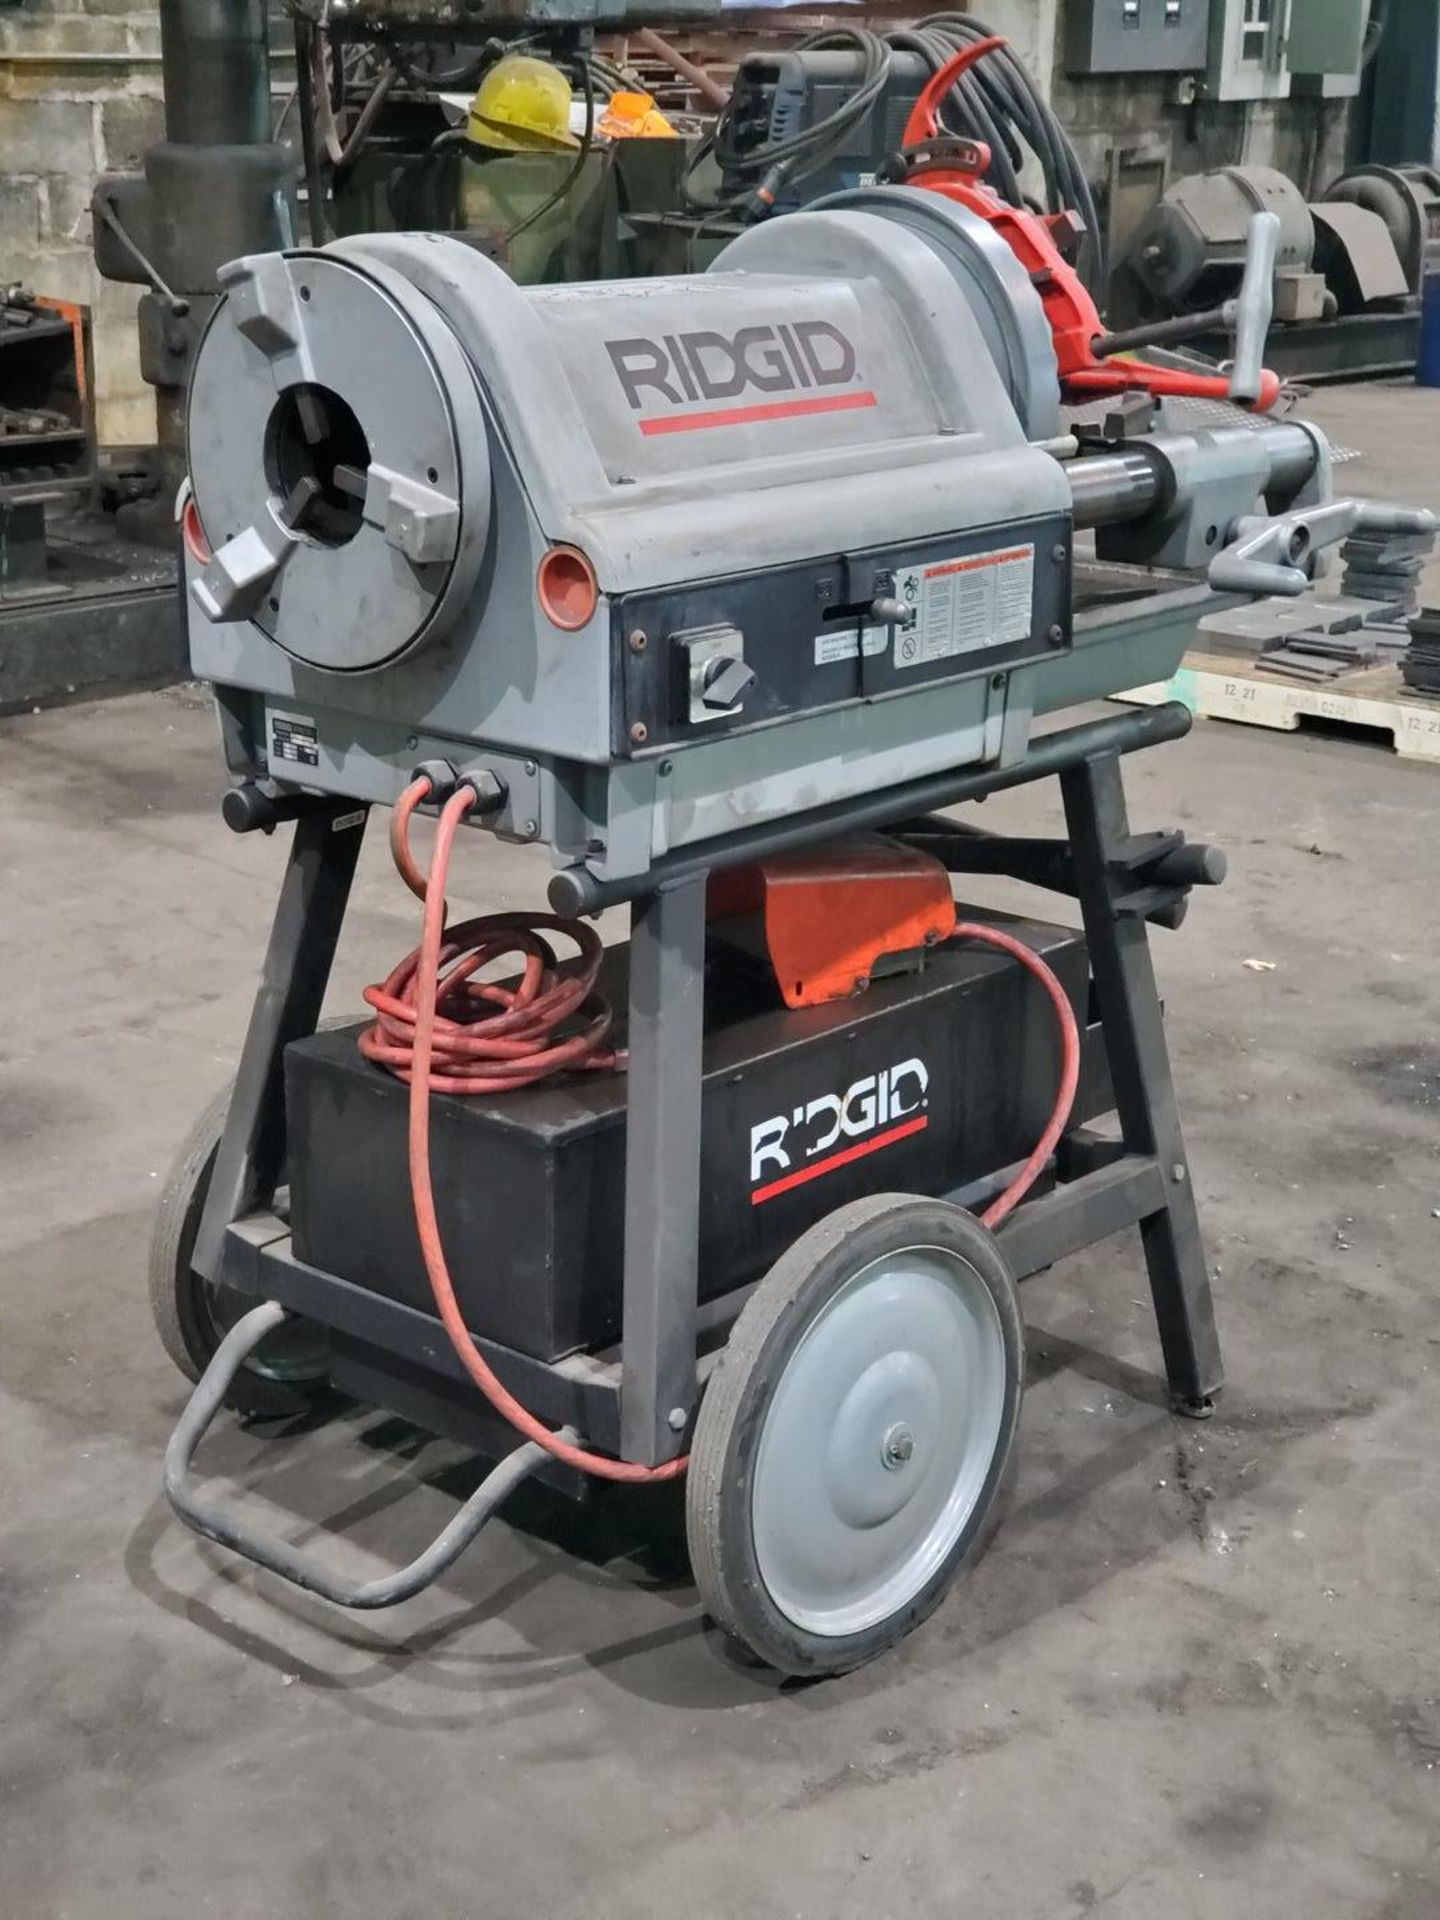 Ridgid 1224 Rolling Pipe Threader Up To 4" Cap.; 60HZ, 120V, 15A, 12/36RPM; W/ Foot Controller - Image 3 of 12